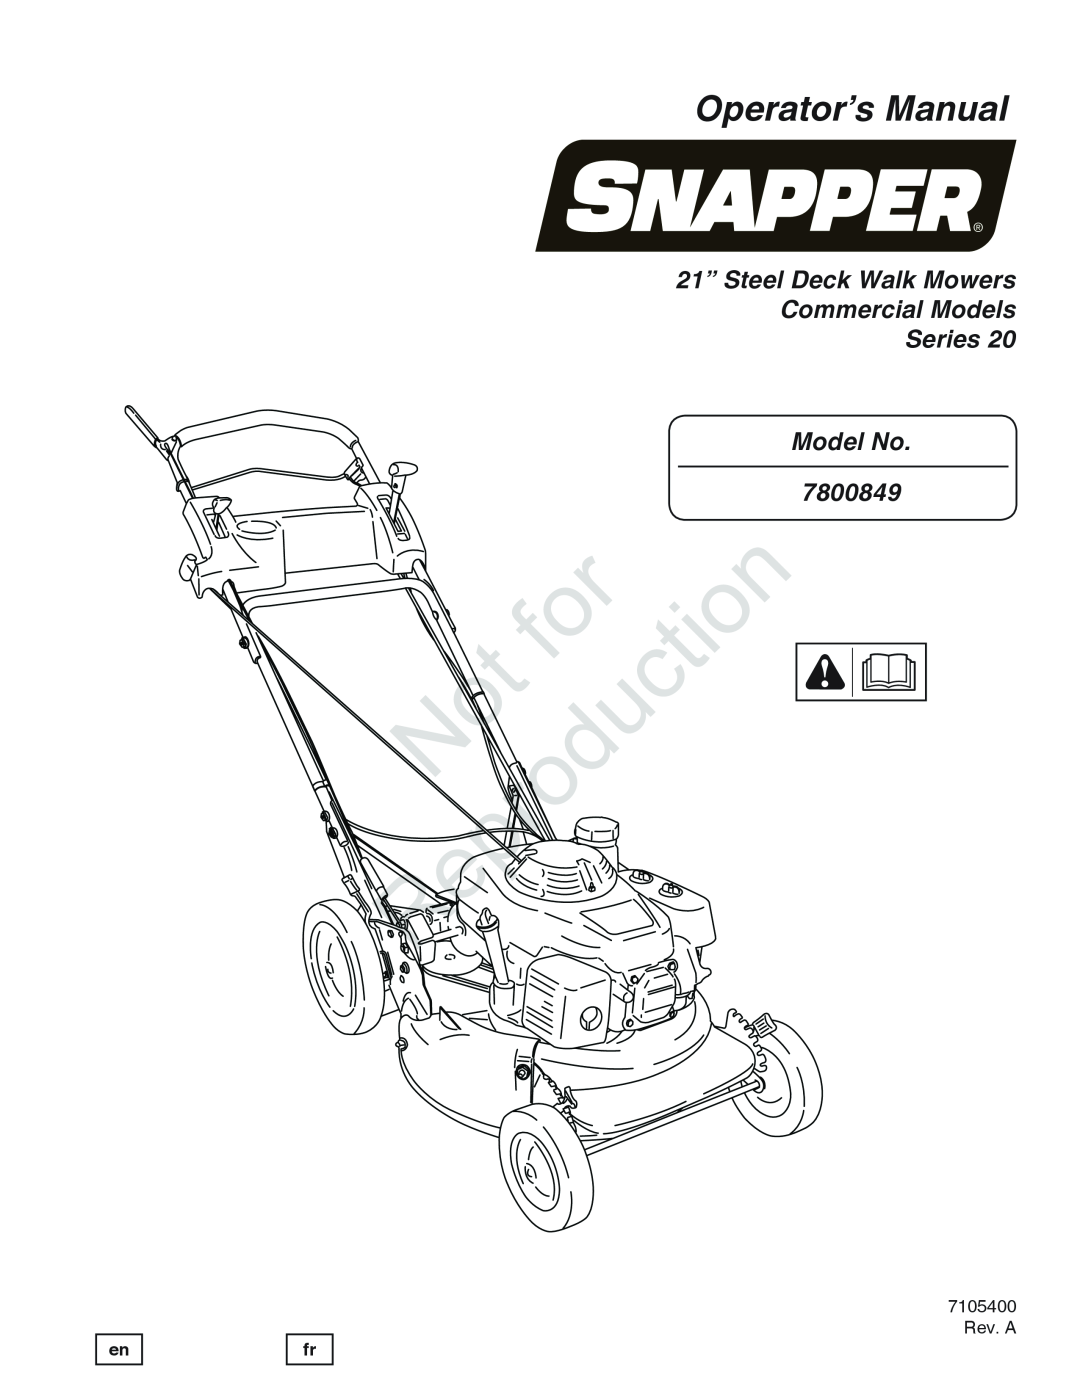 Snapper 7800849 manual Re production, Operator’s Manual 